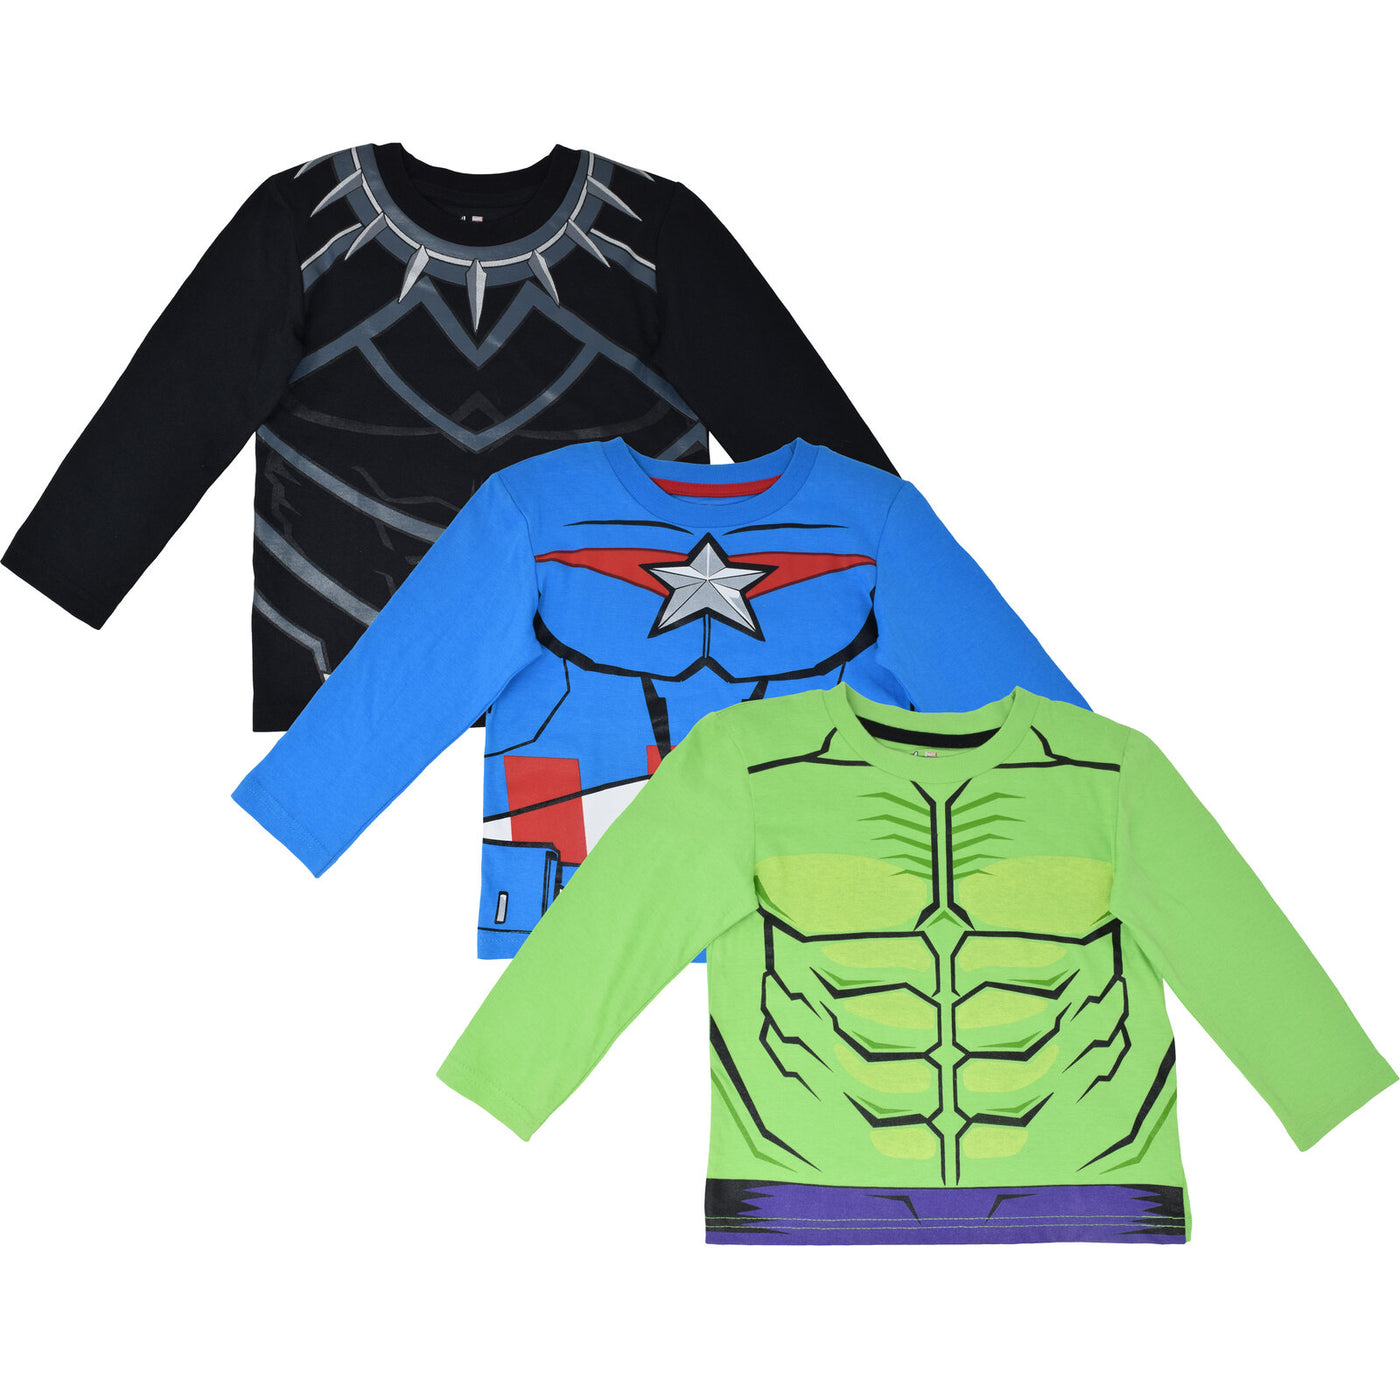 Marvel Avengers 3 Pack Long Sleeve Graphic T-Shirts